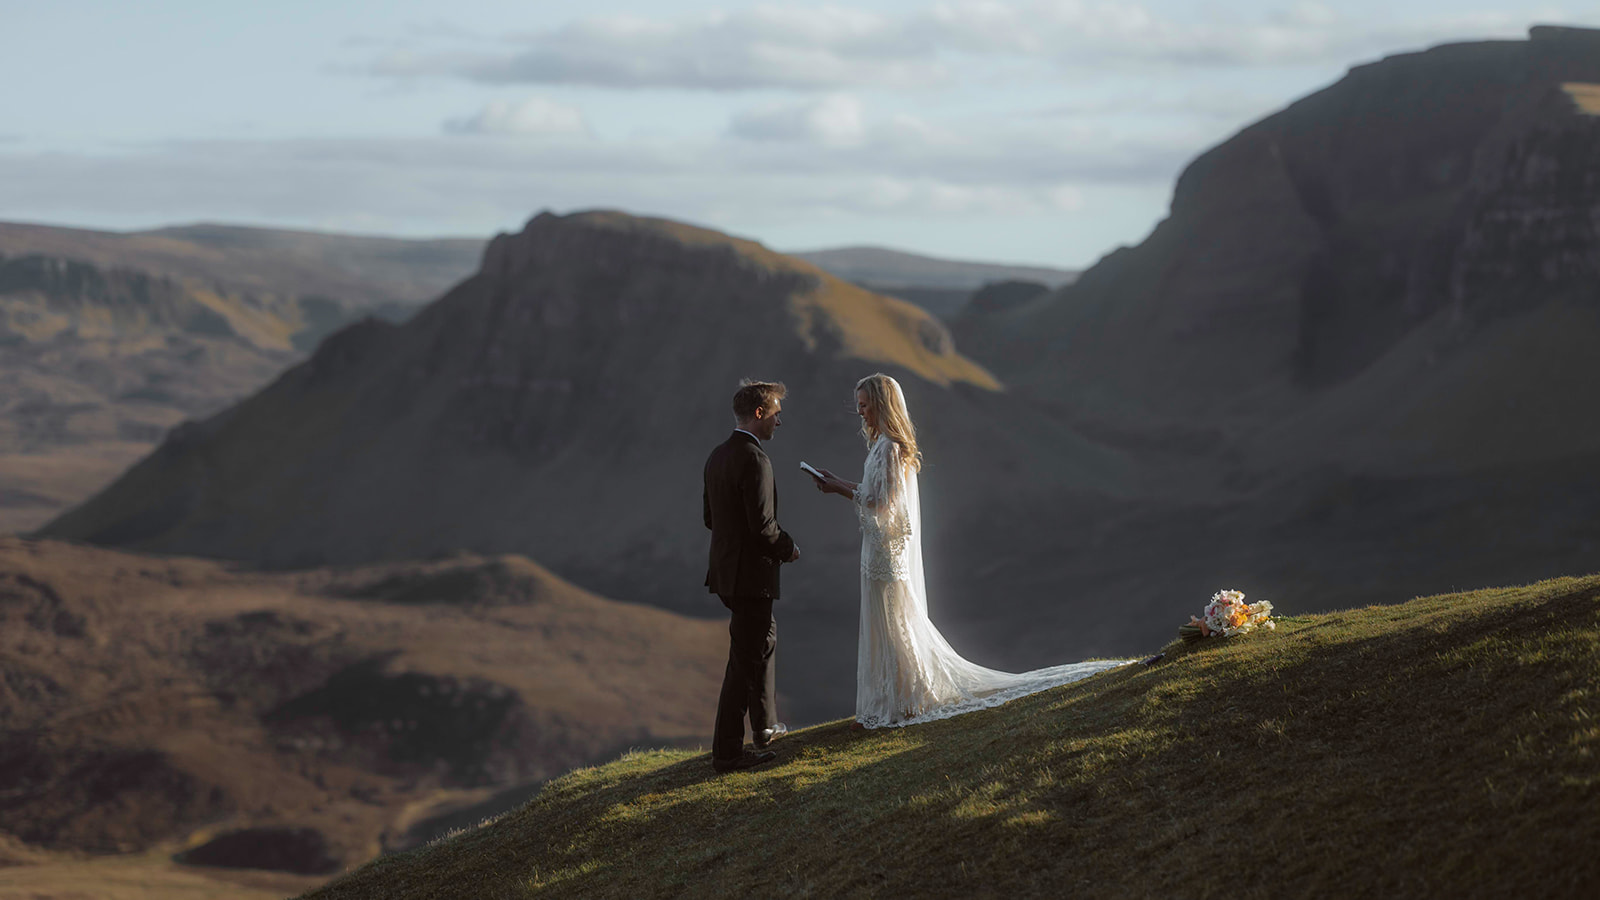 Kara and Andy's Isle of Skye elopement ceremony was a beautiful and intimate affair.